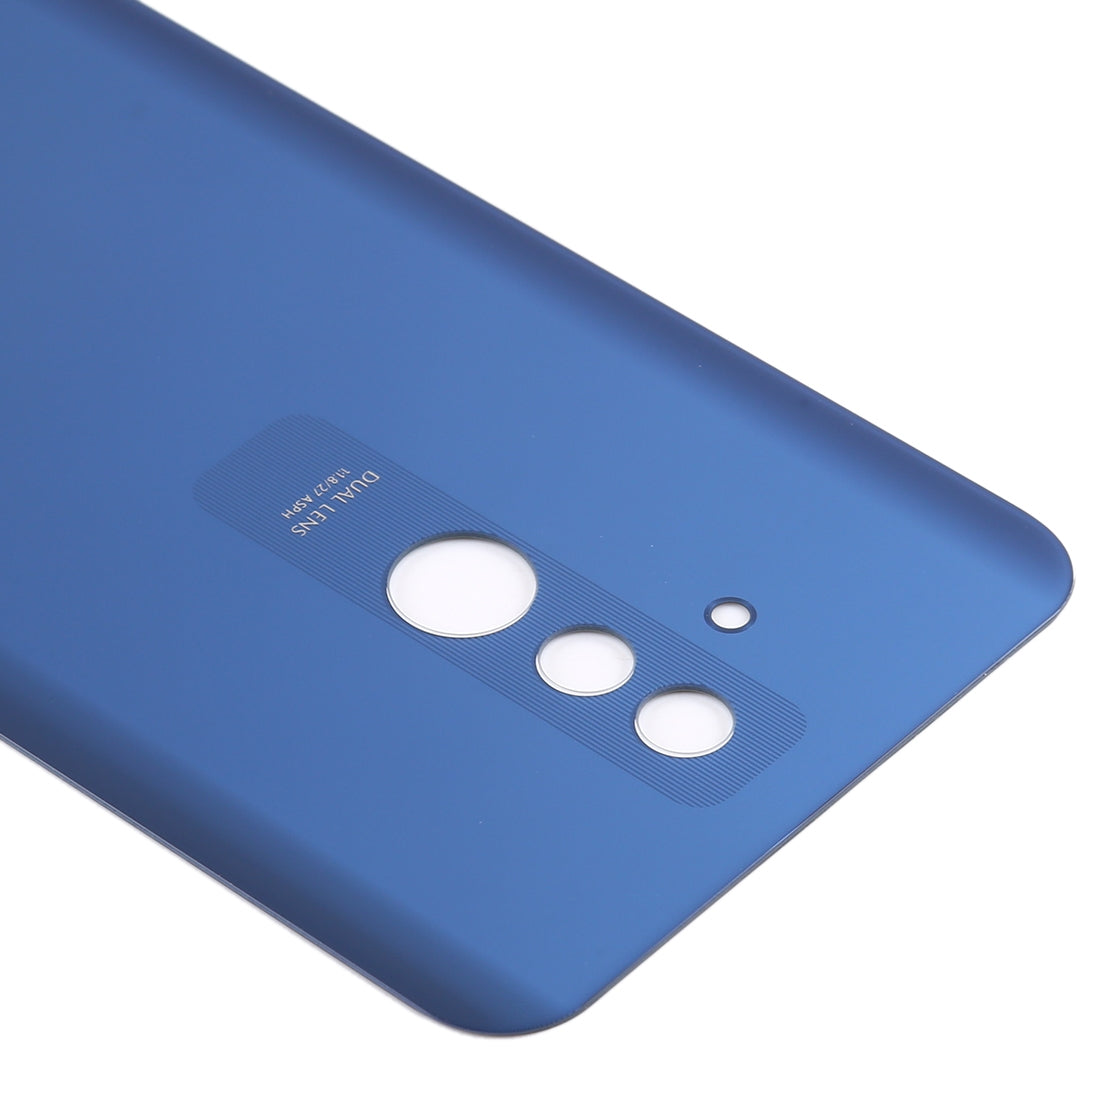 Battery Cover Back Cover Huawei Mate 20 Lite / Maimang 7 Blue